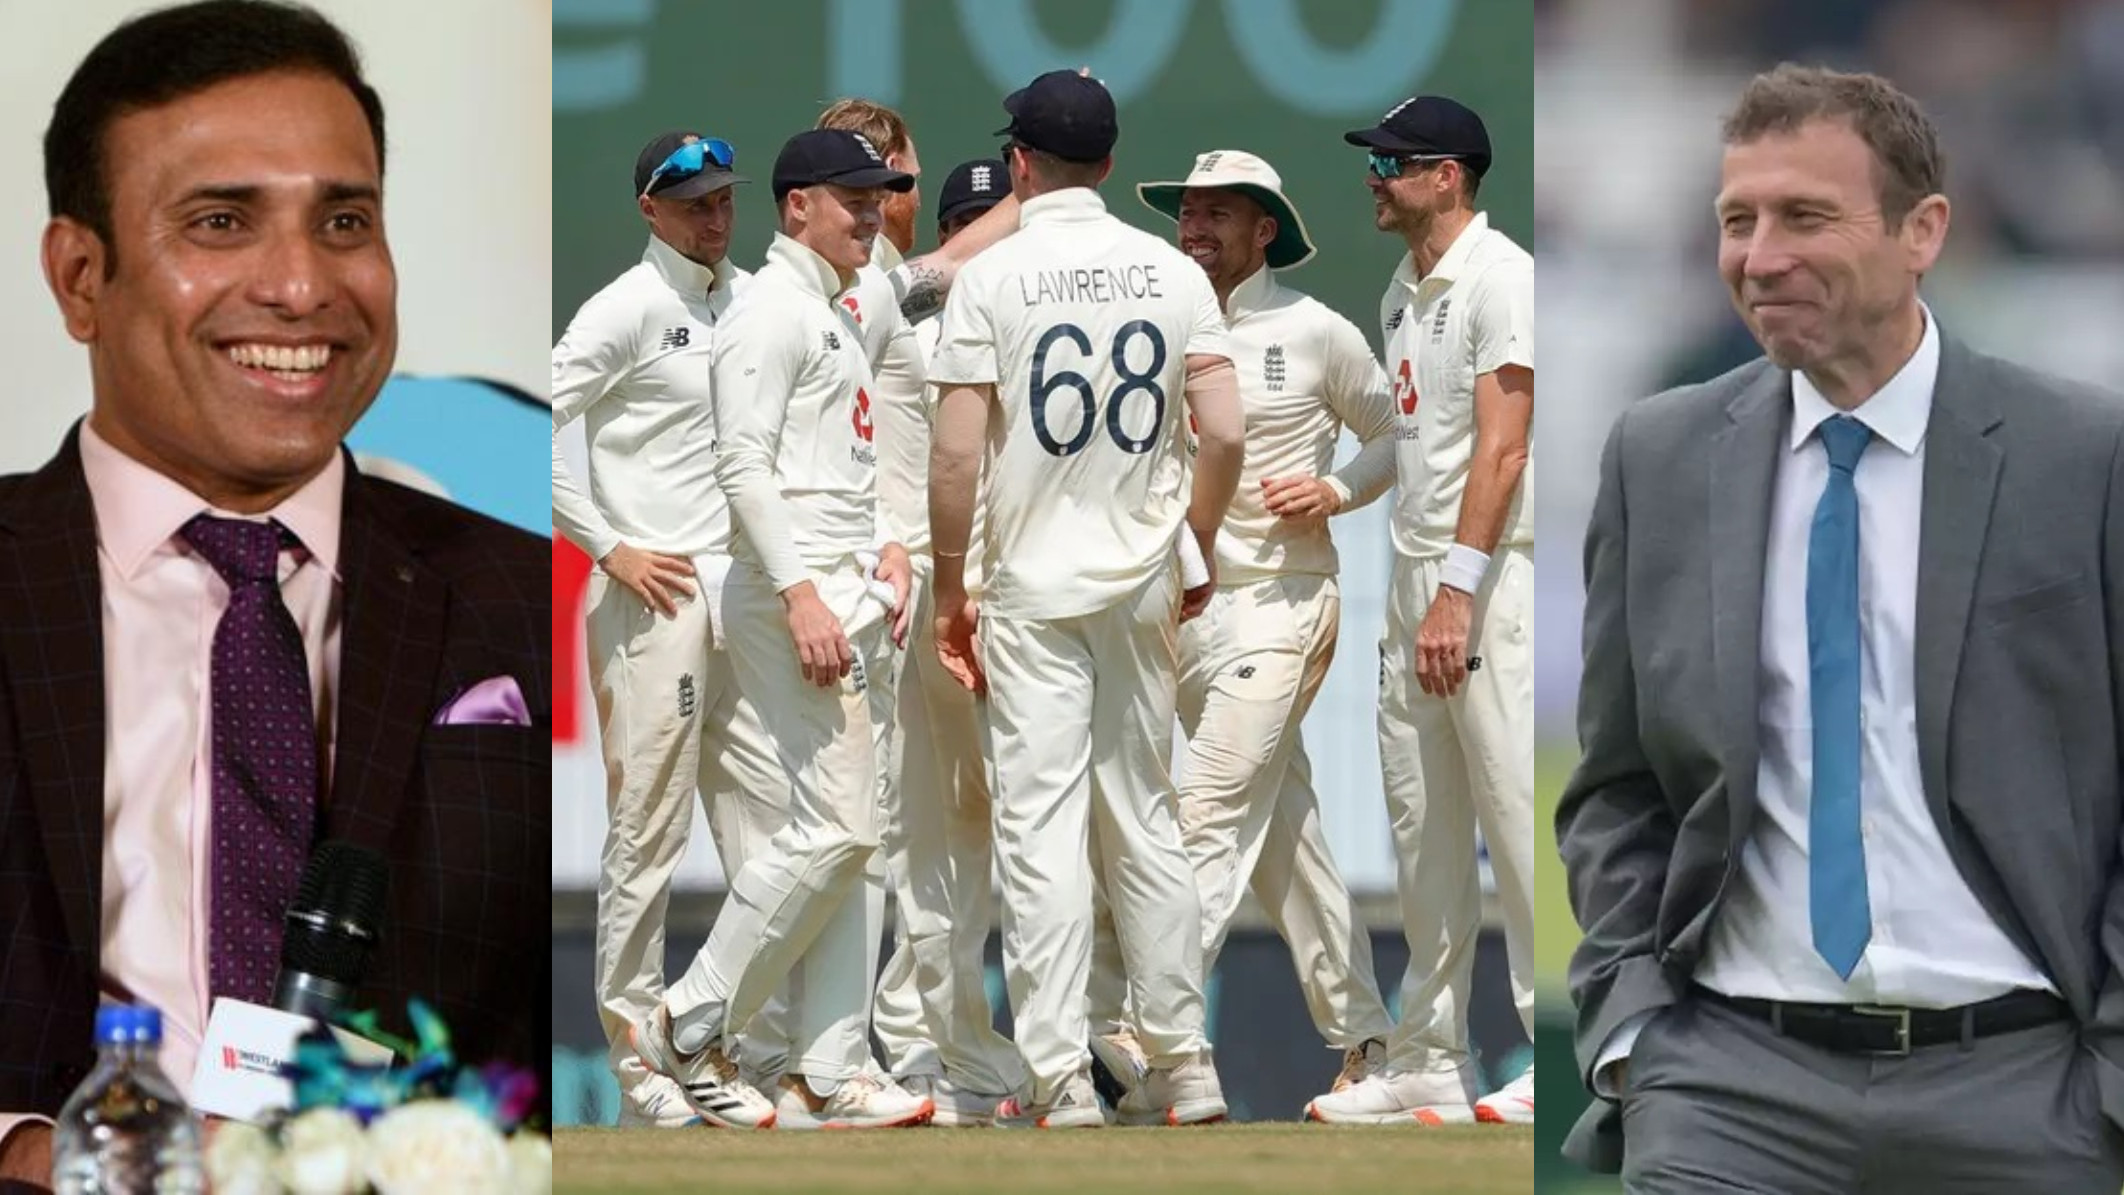 IND v ENG 2021: Cricket fraternity reacts as England wins the first Test by 227 runs in Chennai